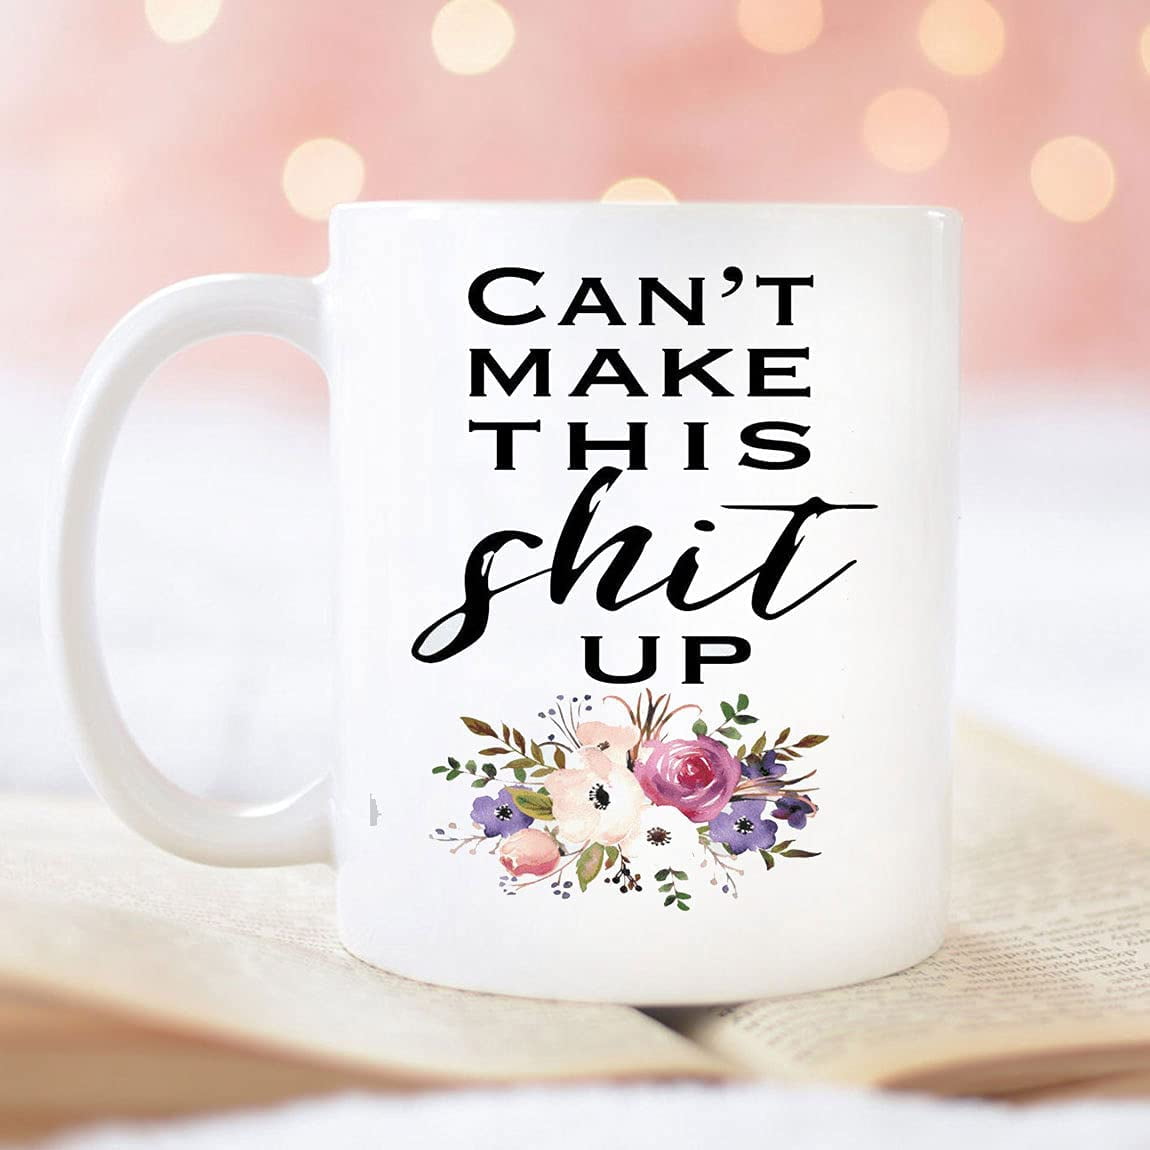 Coffee Drinker Gifts - Coffee Makes Me Poop Funny Gag Gift Ideas for Coffee  Lovers & Drinkers Who Crap After Drinking Coffee Mug for Sale by merkraht